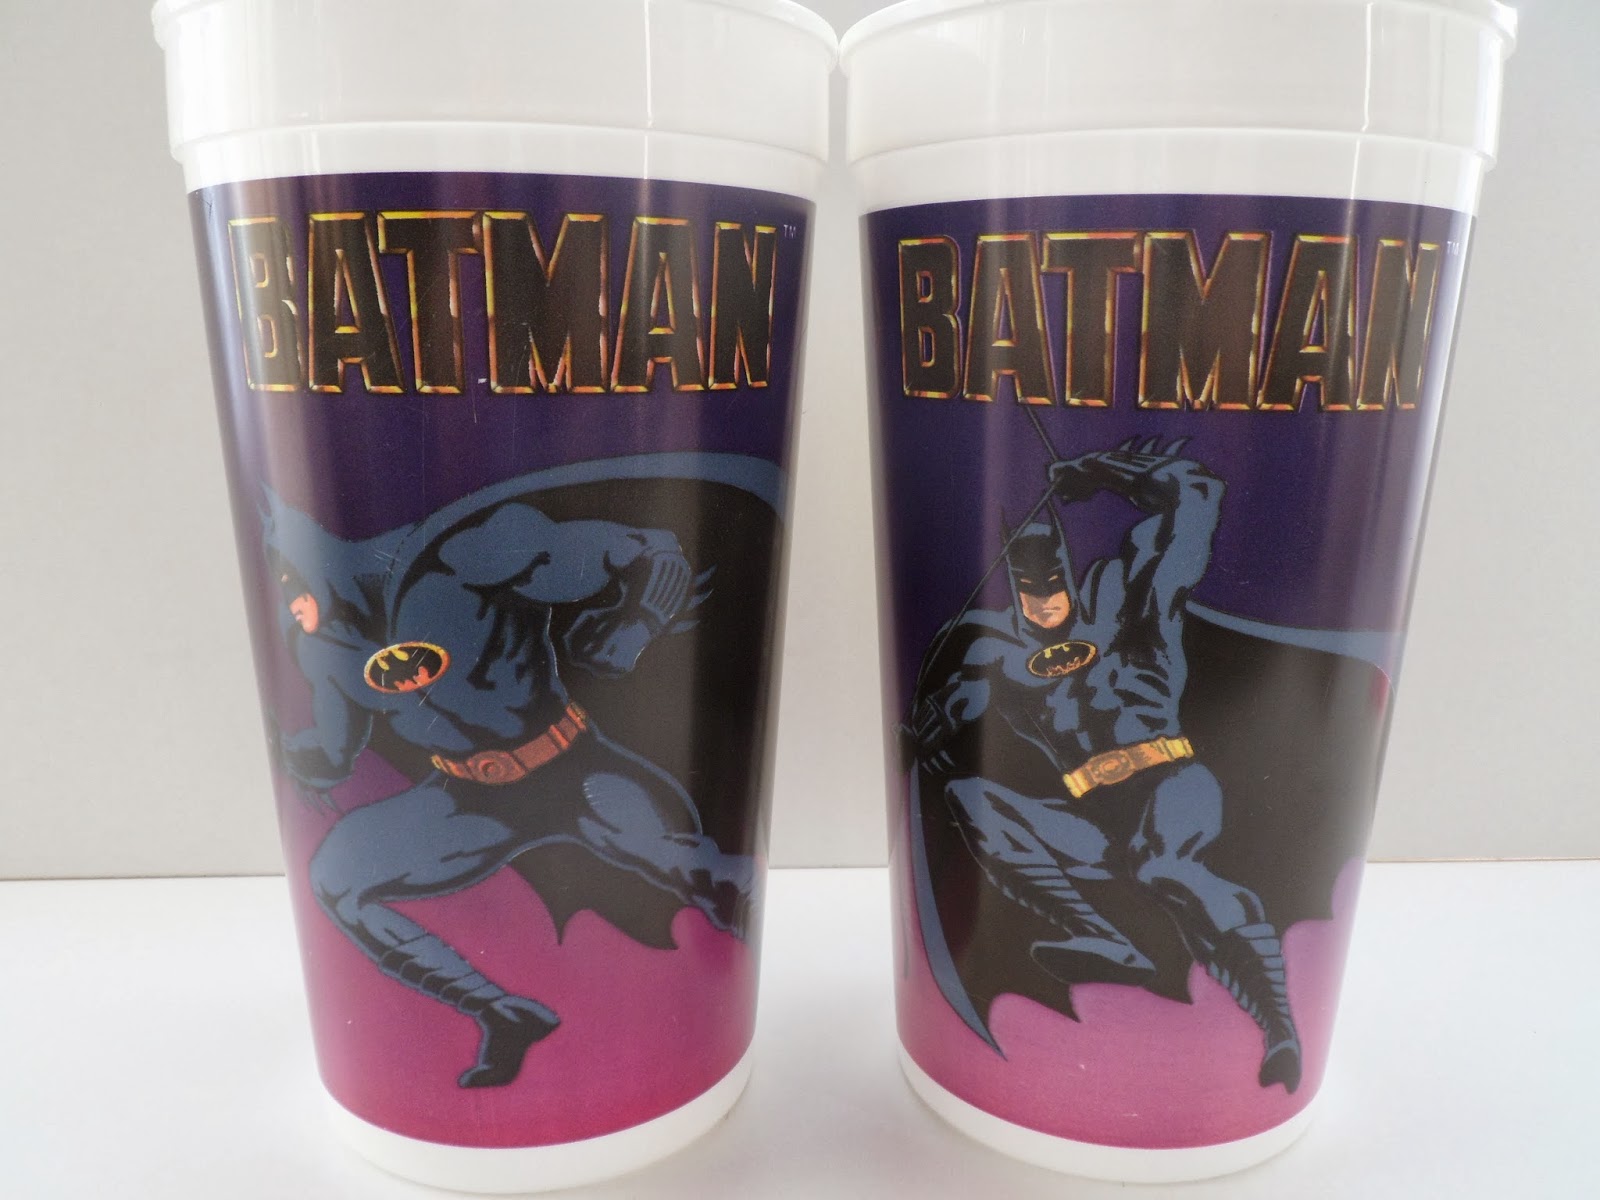 Details about  / Batman Returns Classic Movie Personalised Printed Mug Coffee Tea Drinks Cup Gift